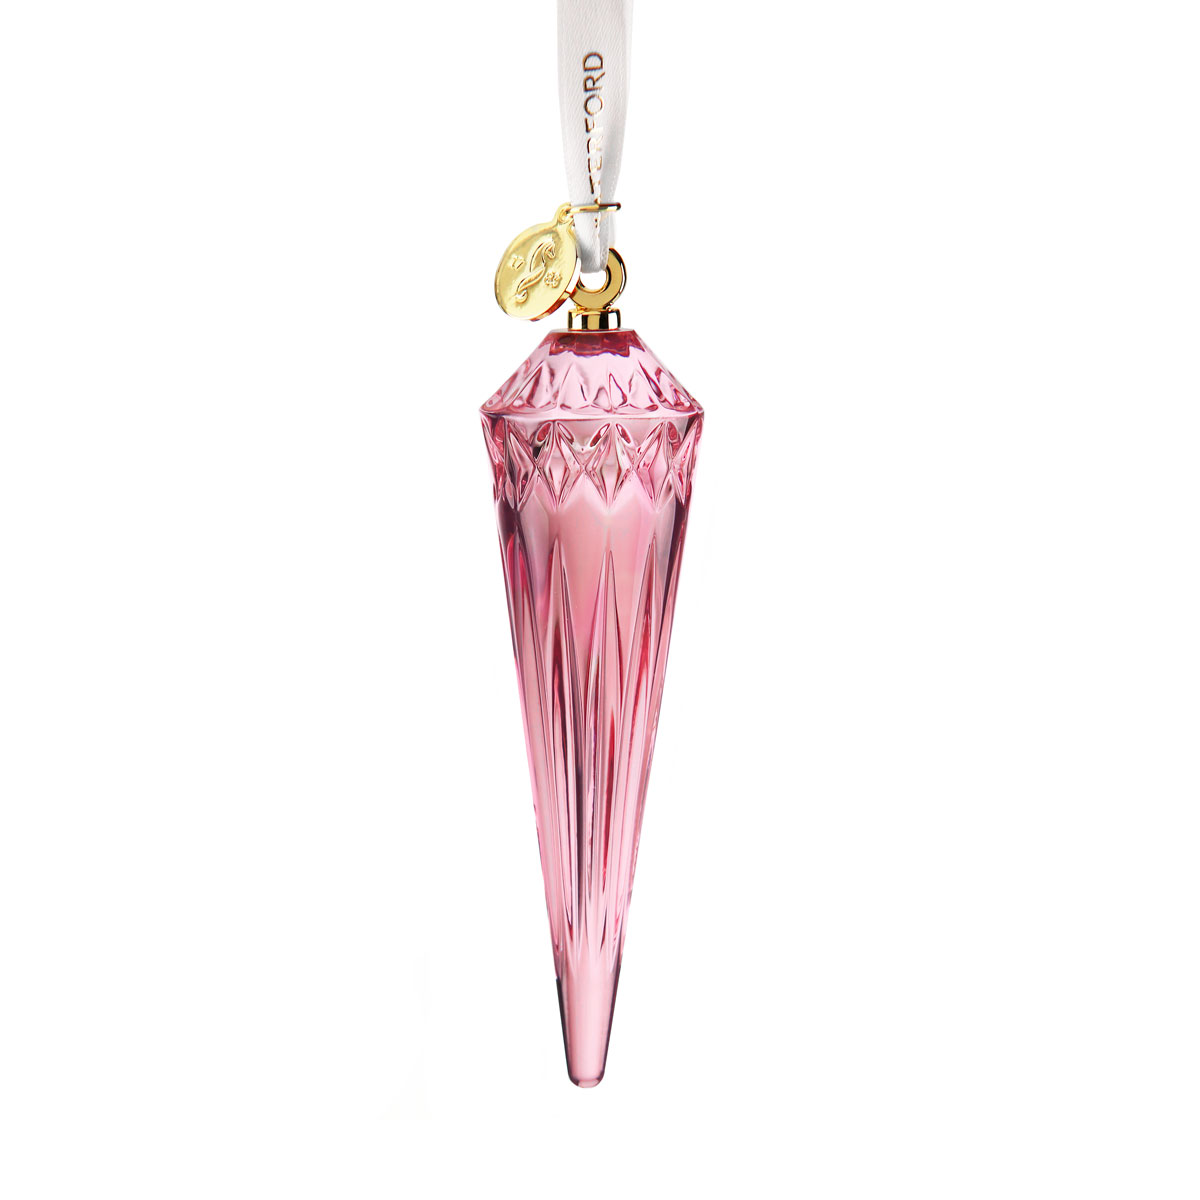 Waterford Crystal 2022 Lismore Icicle Cranberry Pink Ornament